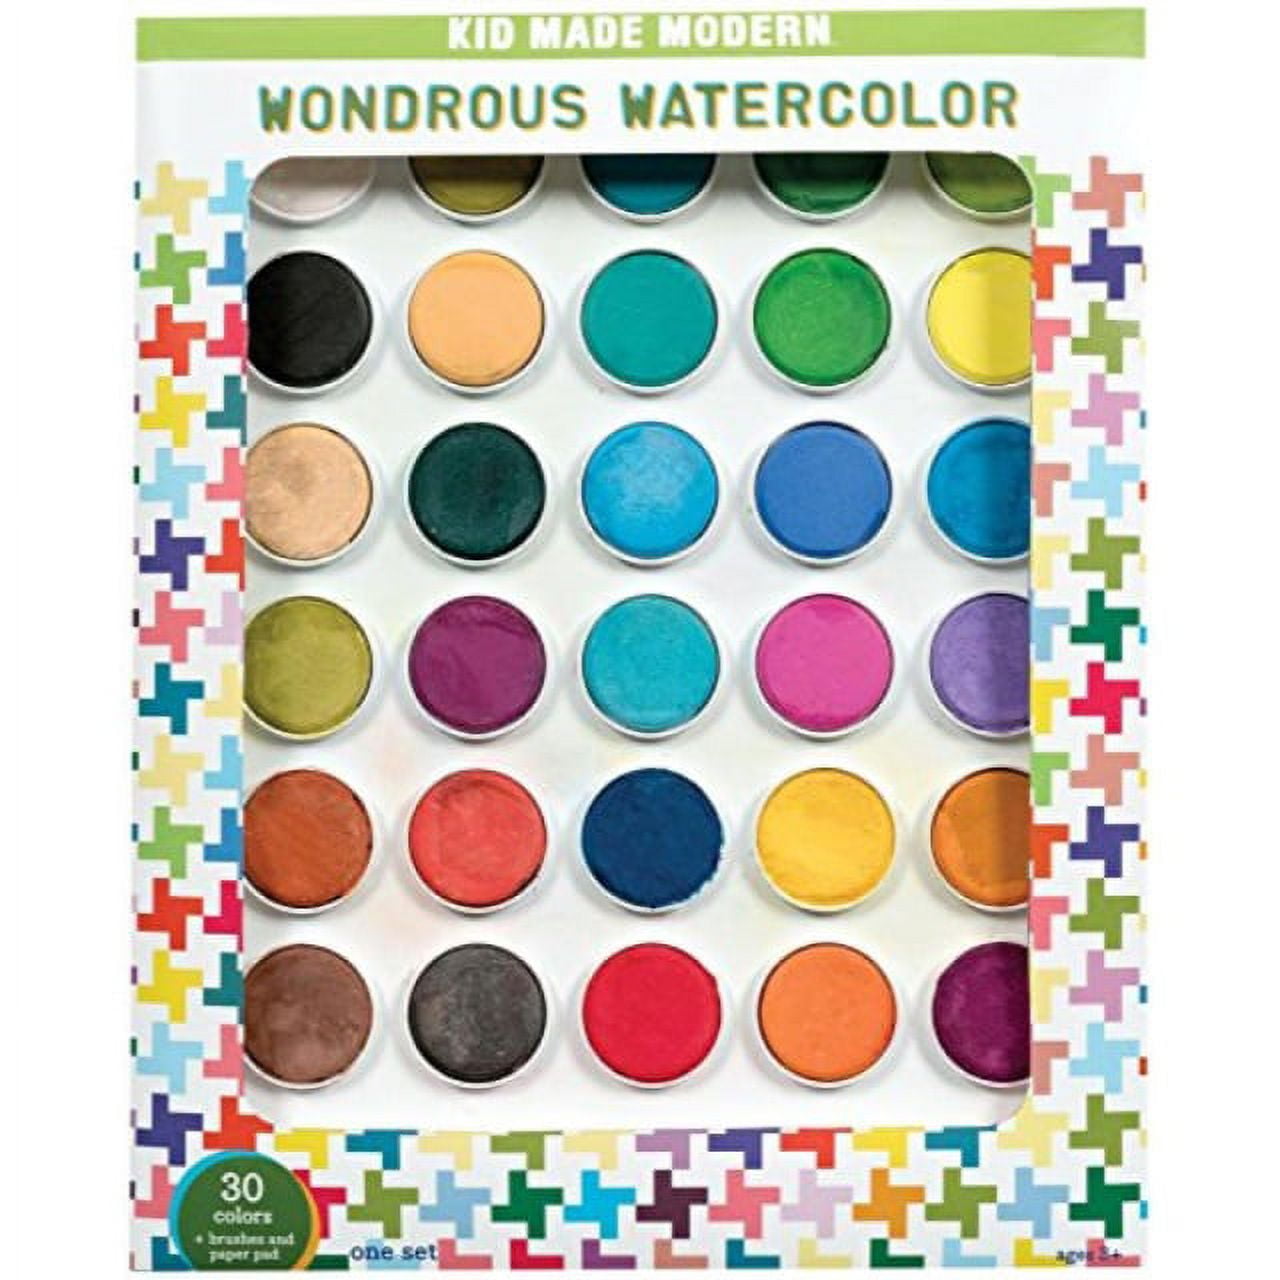 Kid Made Modern Wondrous Watercolor Kit - Kids Arts and Crafts Painting  Supplies (30 Colors)